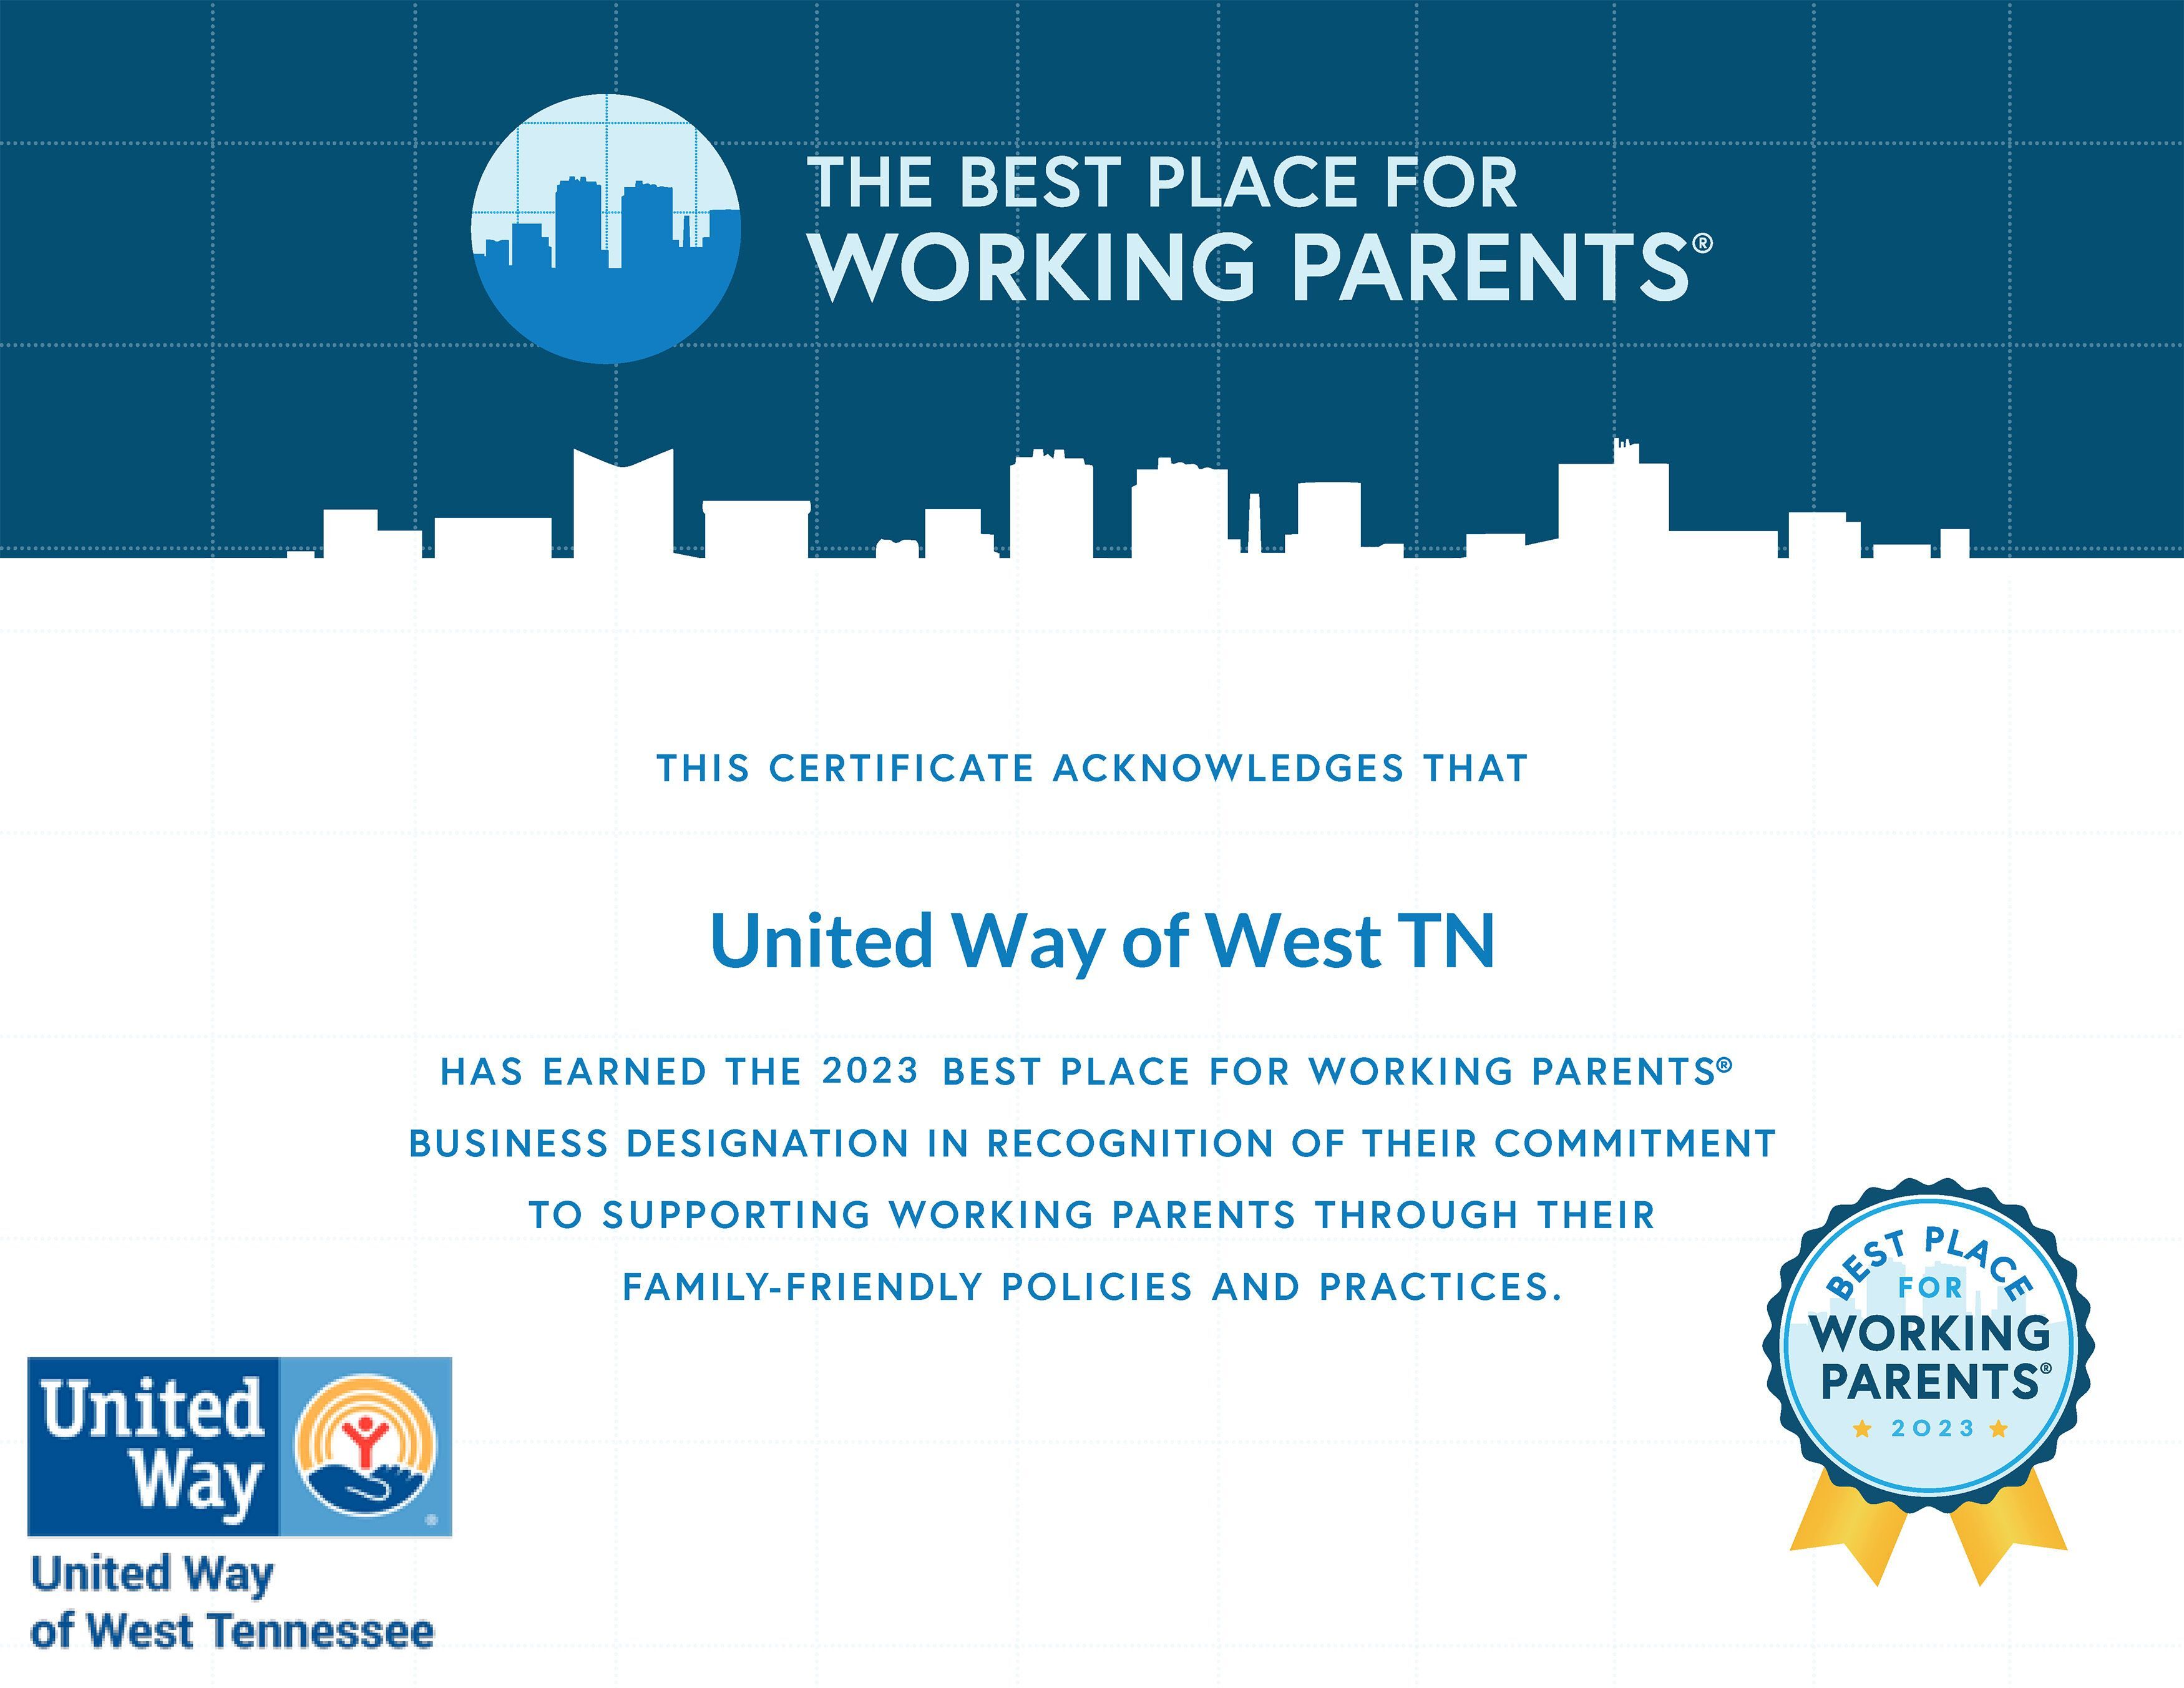 United Way of West Tennessee has been named a 2023 Best Place for Working Parents.